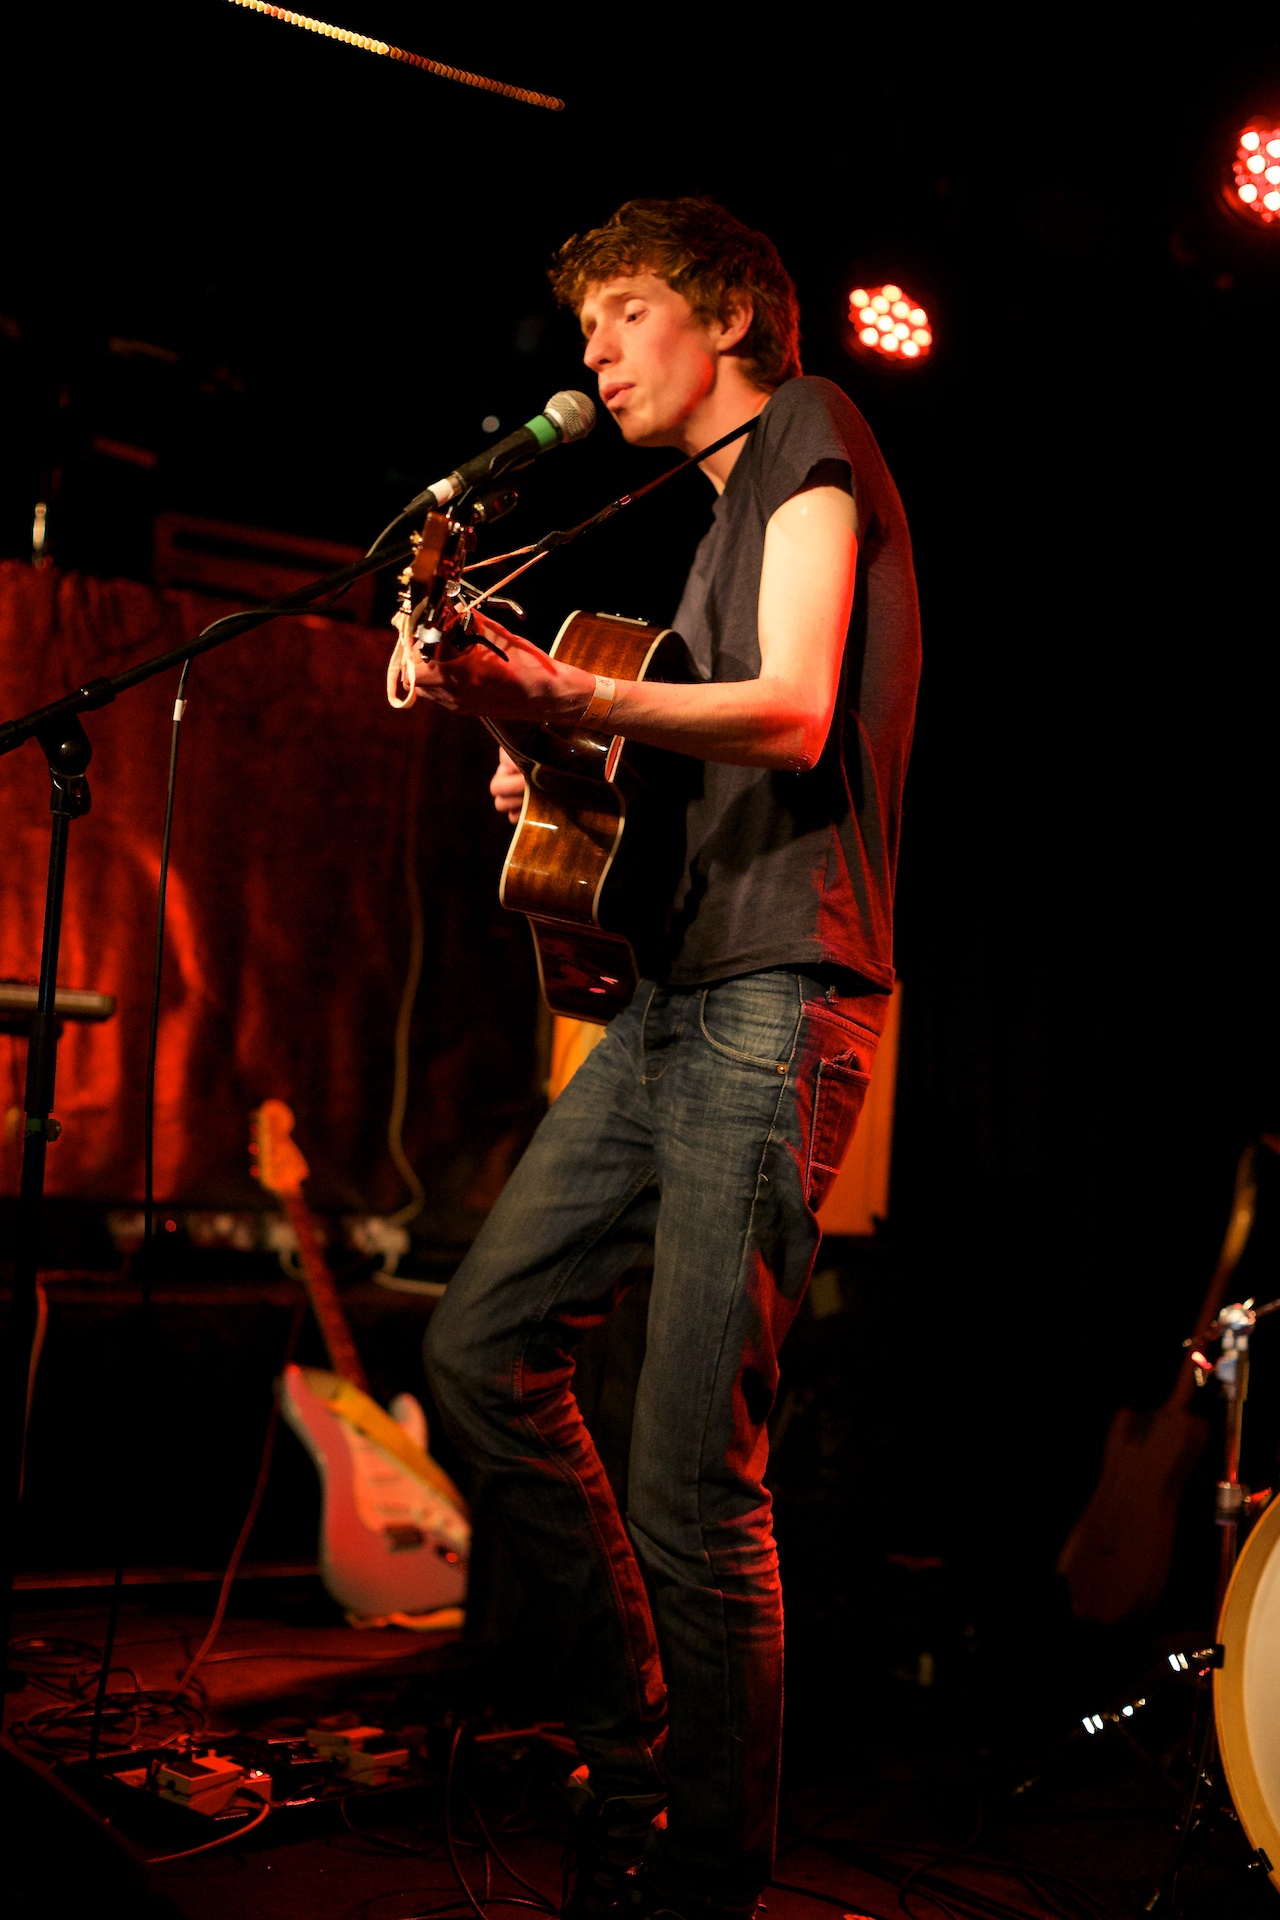 the person on stage with an acoustic guitar